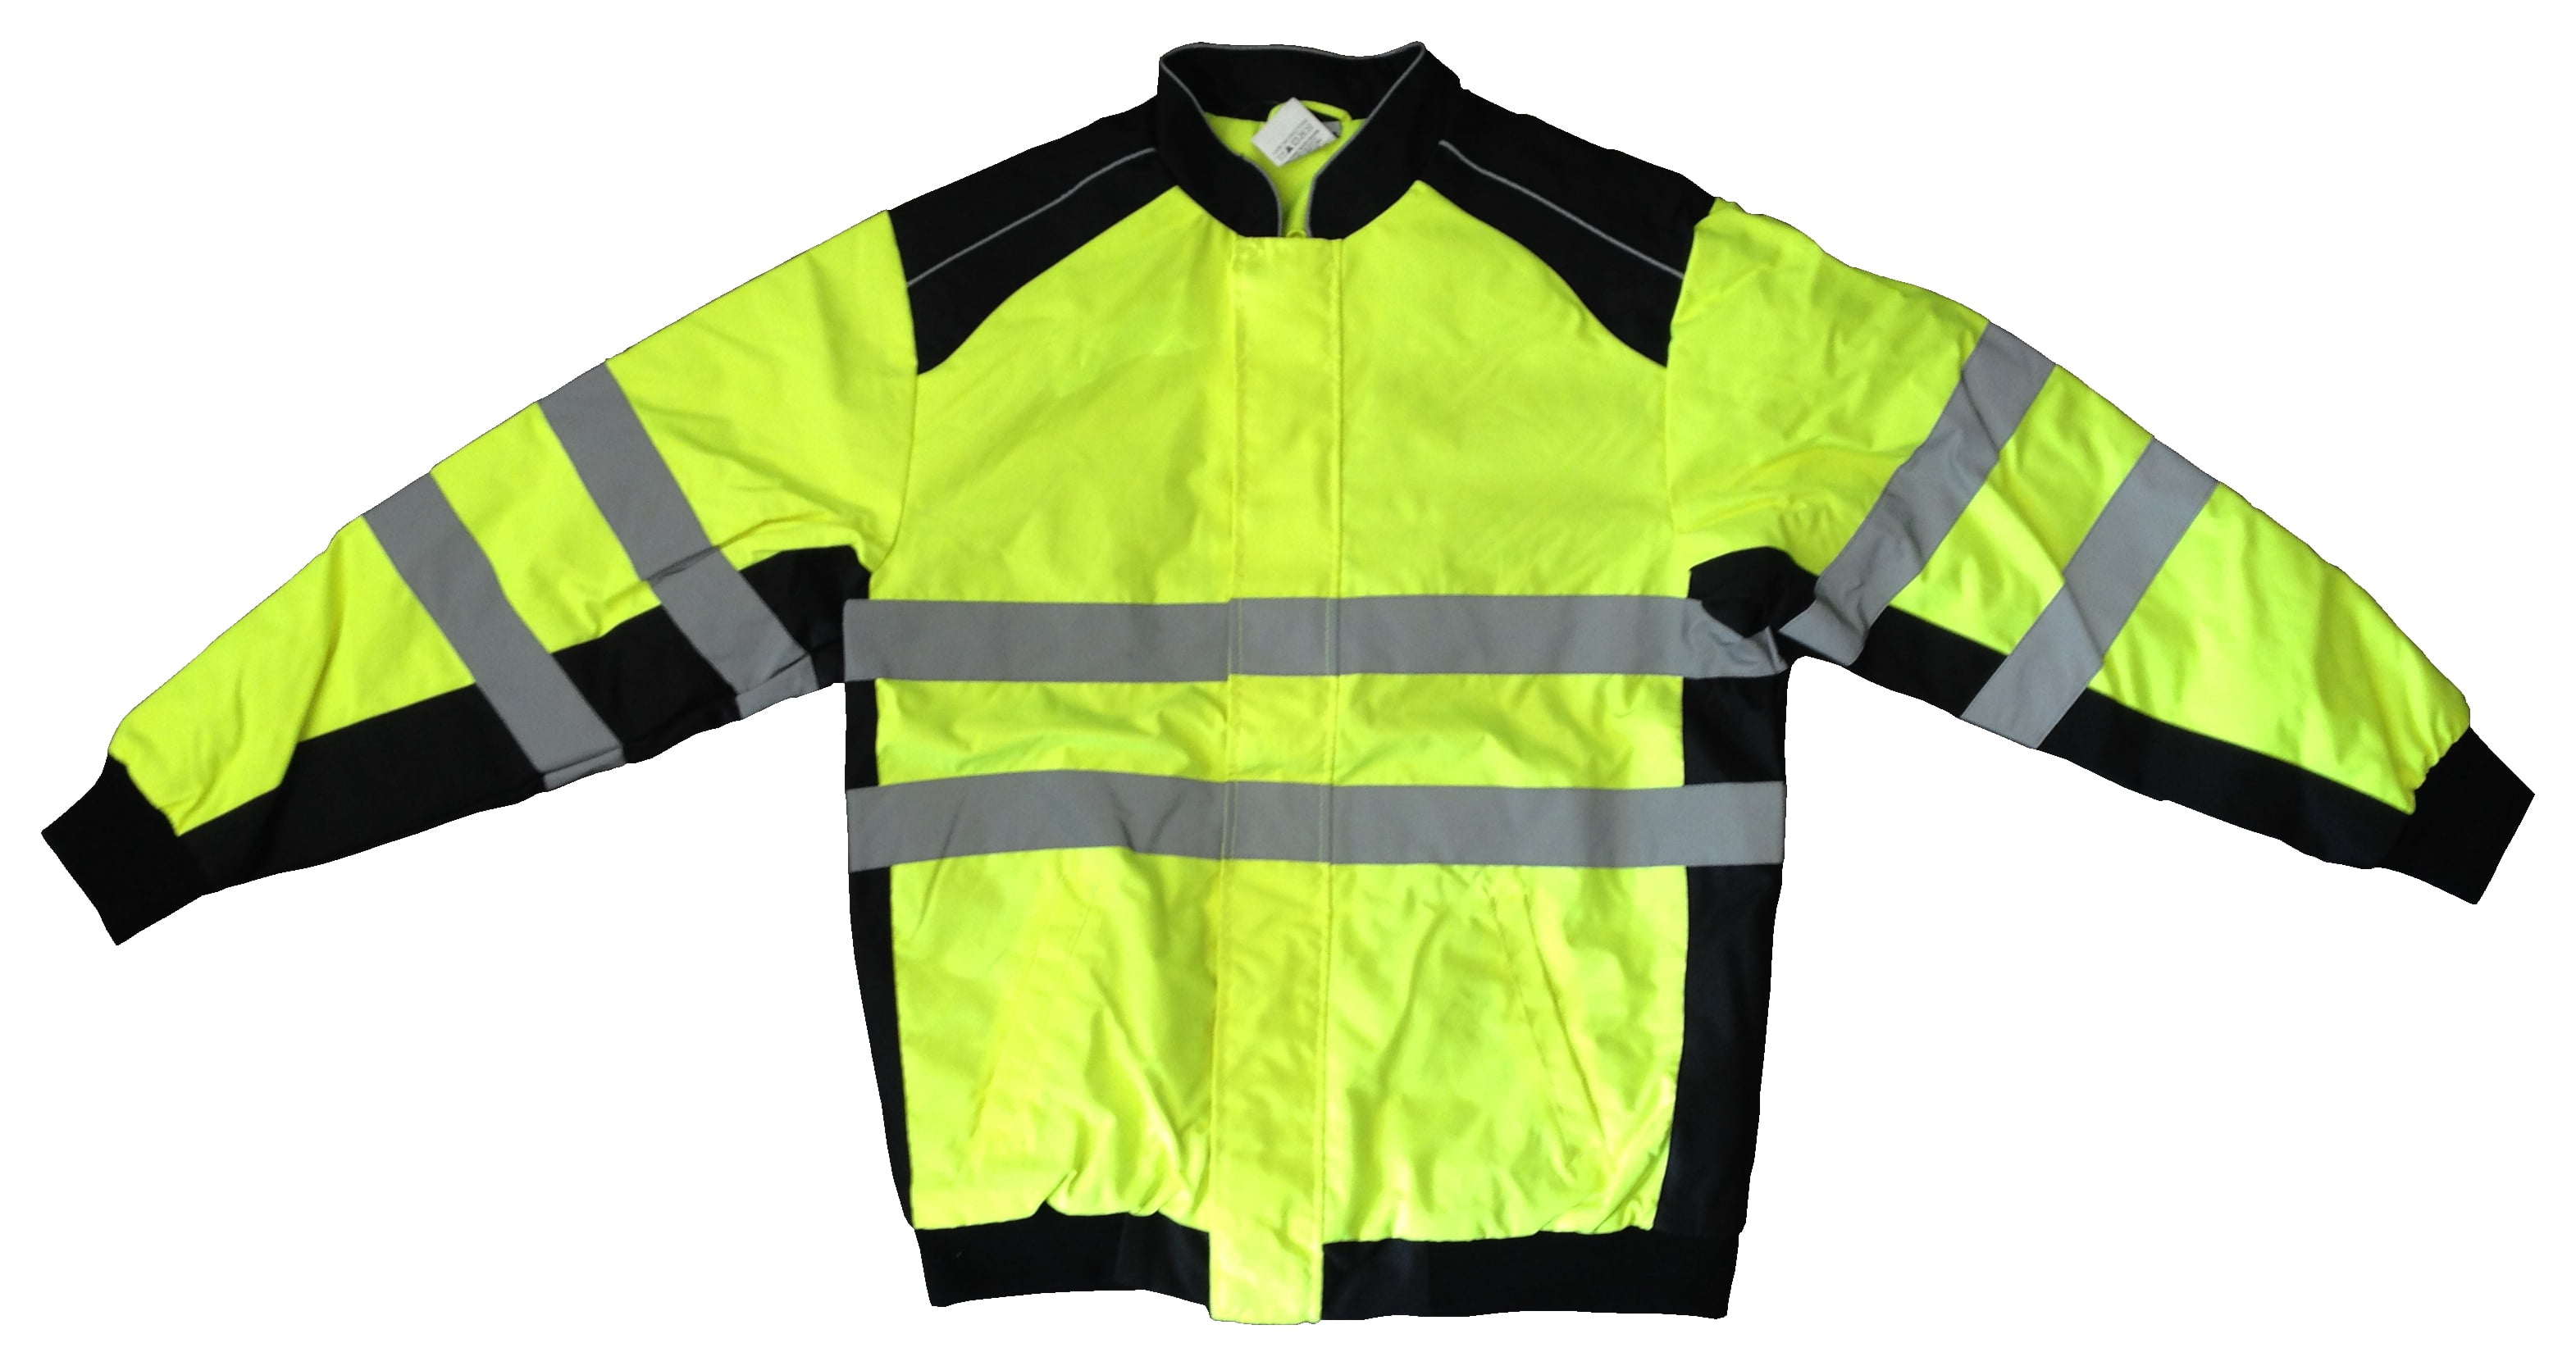 Boston Industrial High Visibility Class III Lime Spring Jacket, Medium ...